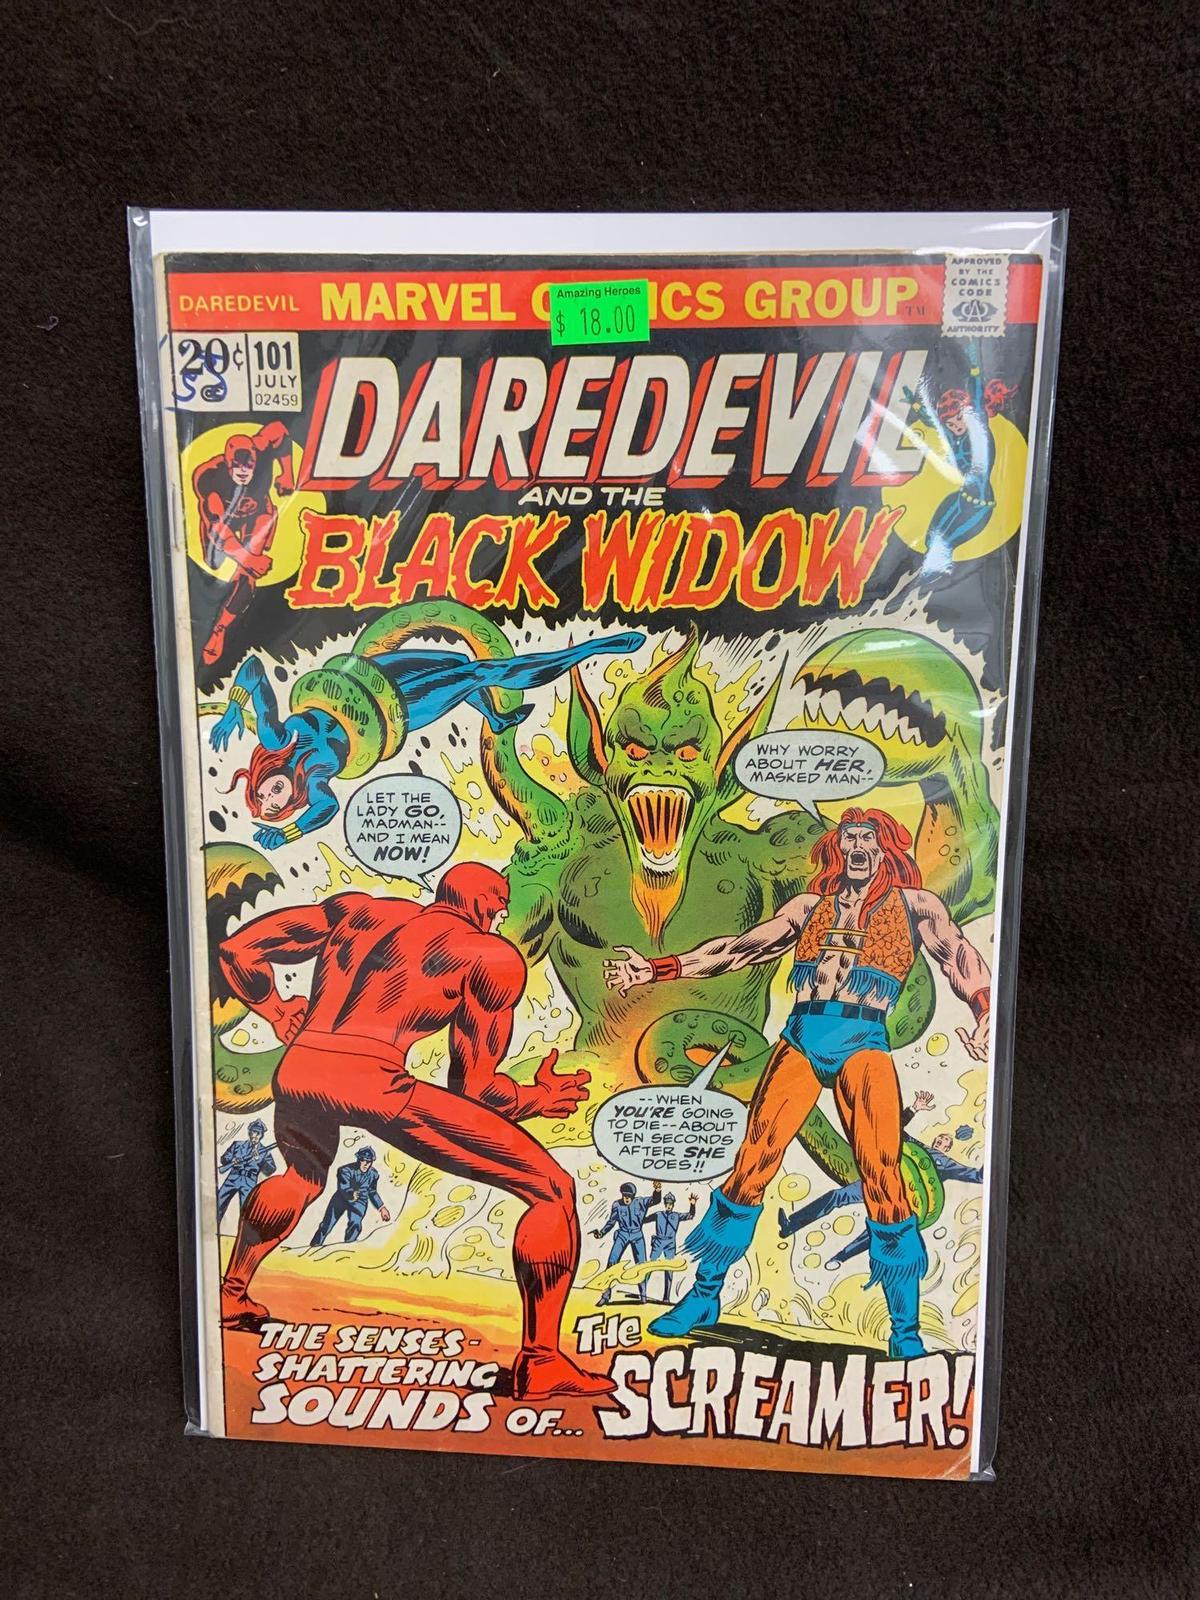 Daredevil and the Black Widow #101 Comic Book from Amazing Collection